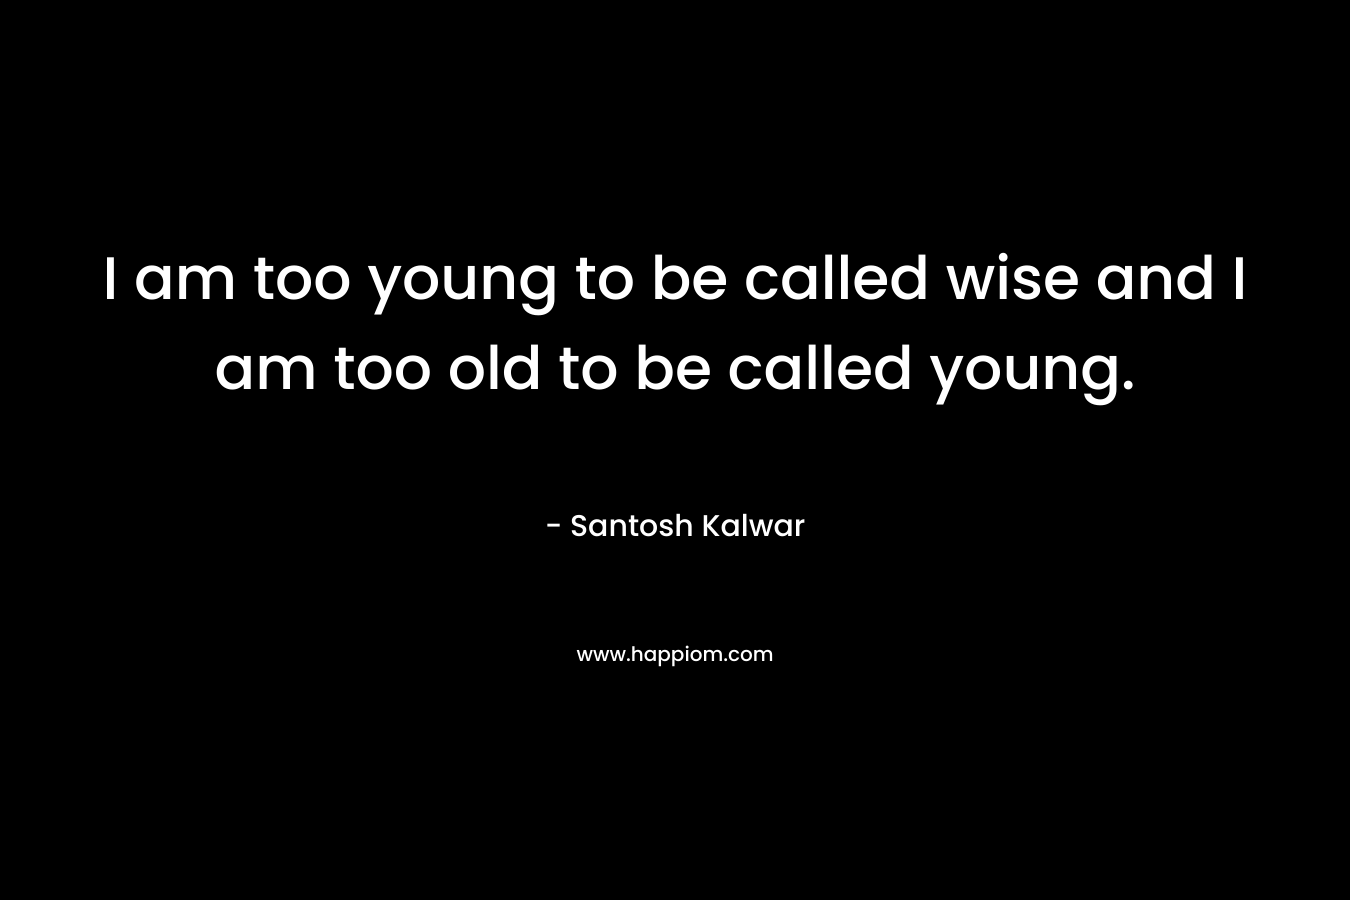 I am too young to be called wise and I am too old to be called young. – Santosh Kalwar